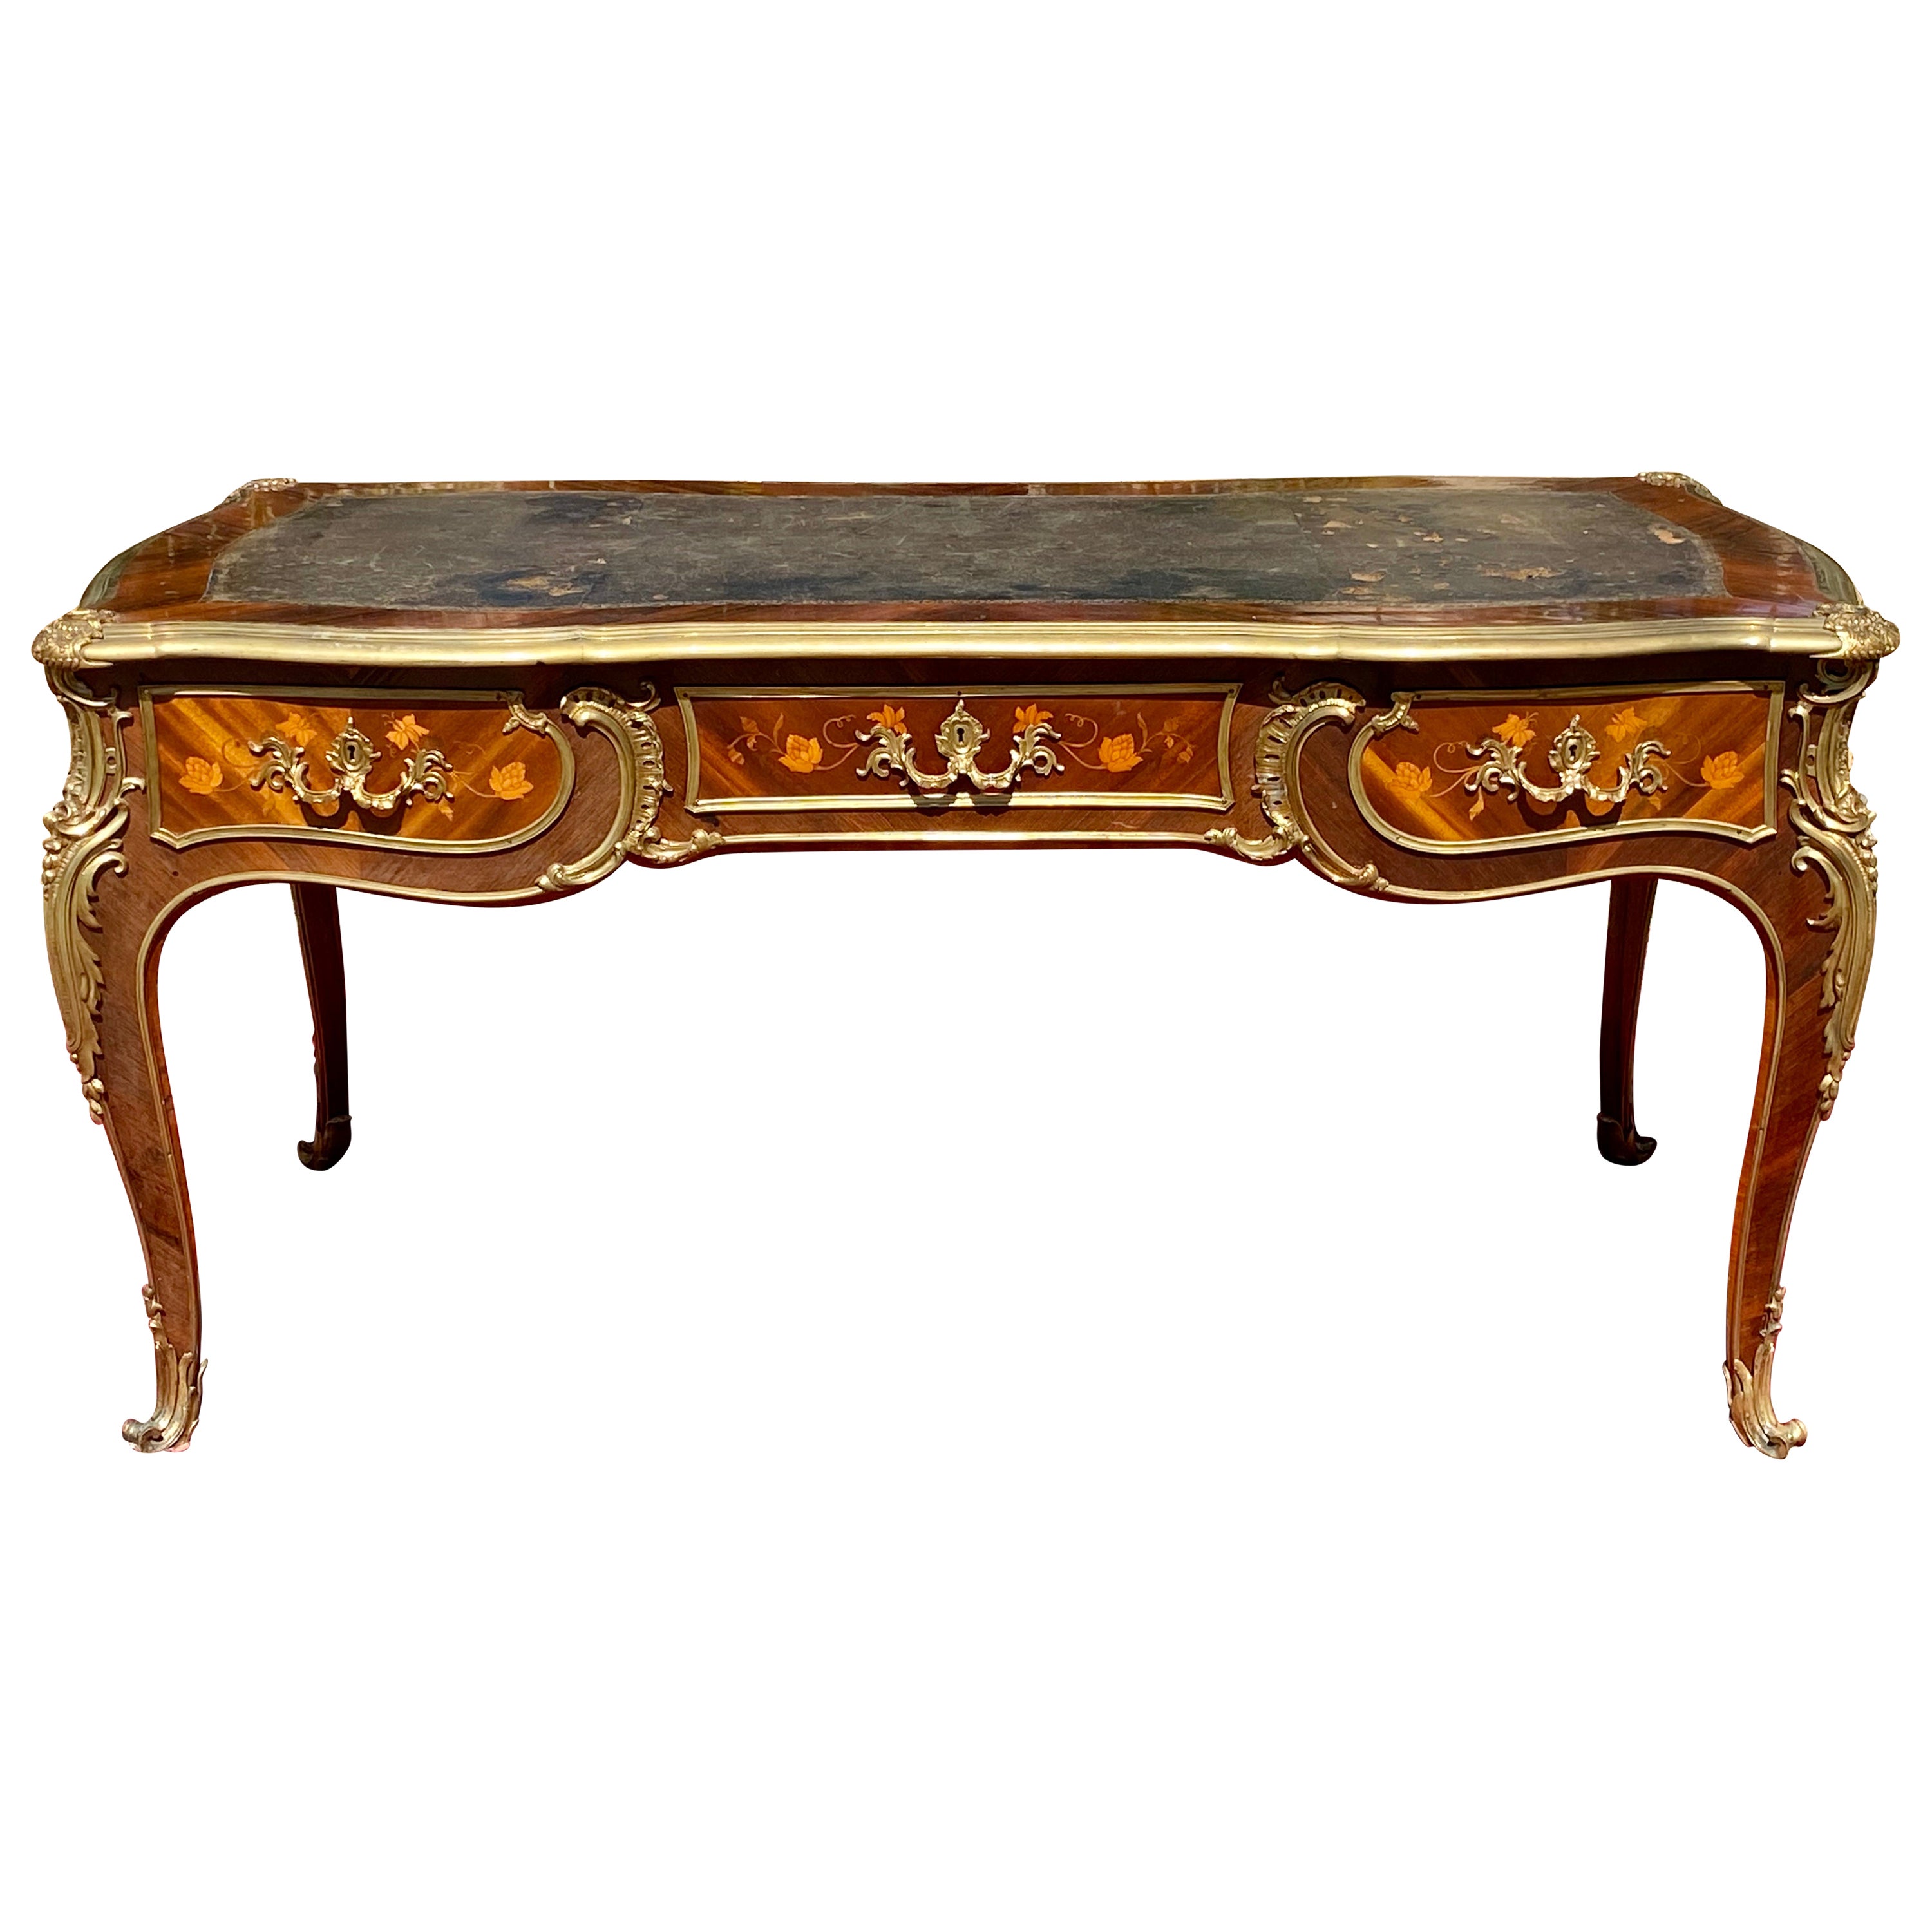 Gervais Durand, 19th Century Middle Desk in Marquetry & Bronze Style Louis XV For Sale